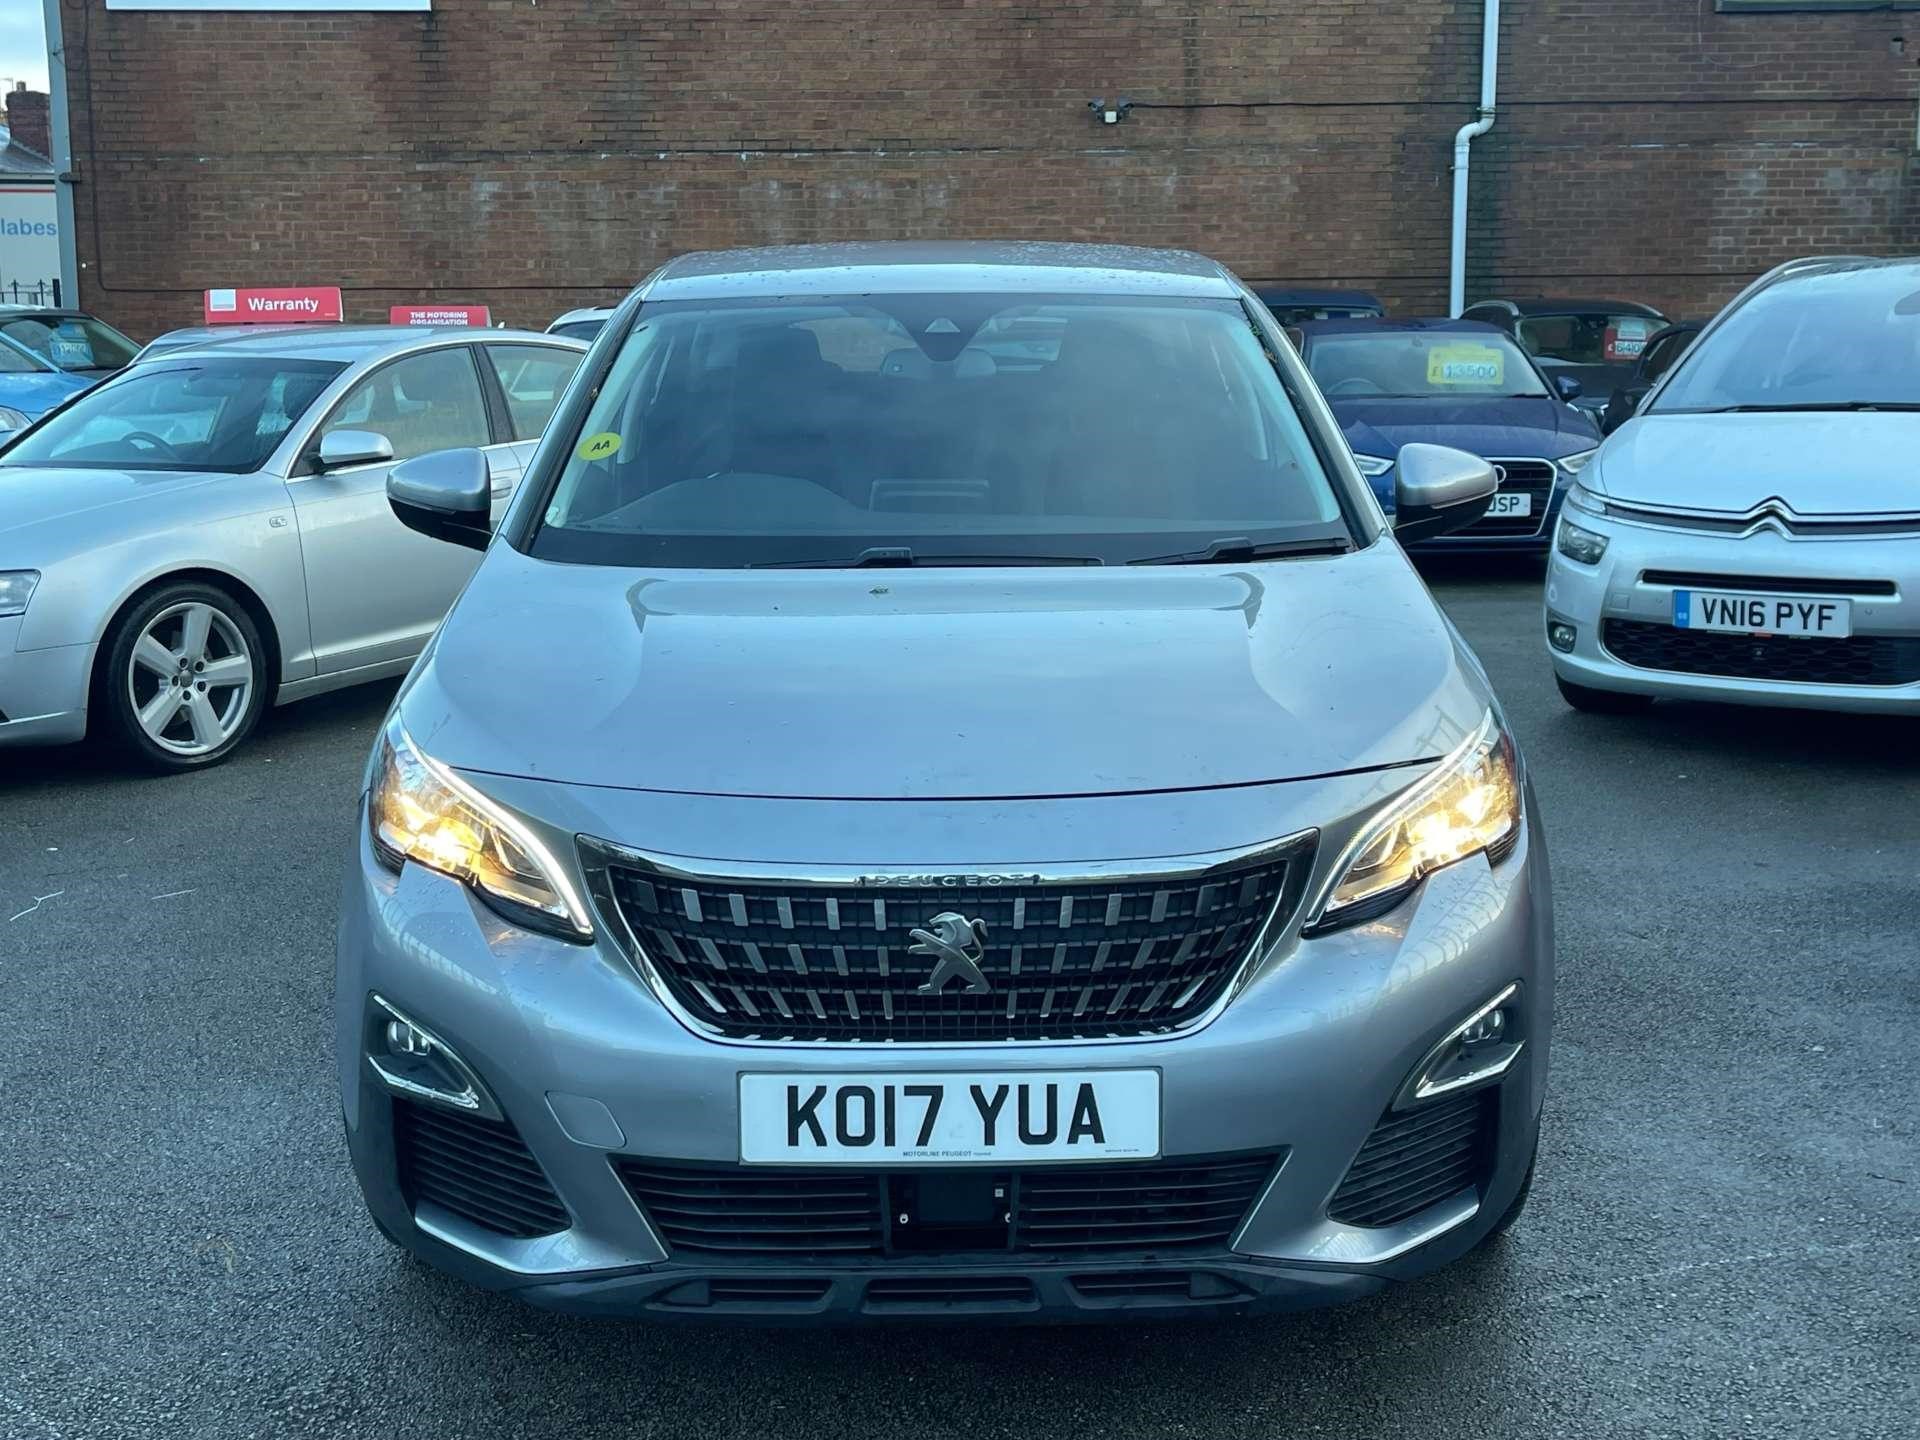 Used Peugeot 3008 for sale in Stockport, Cheshire